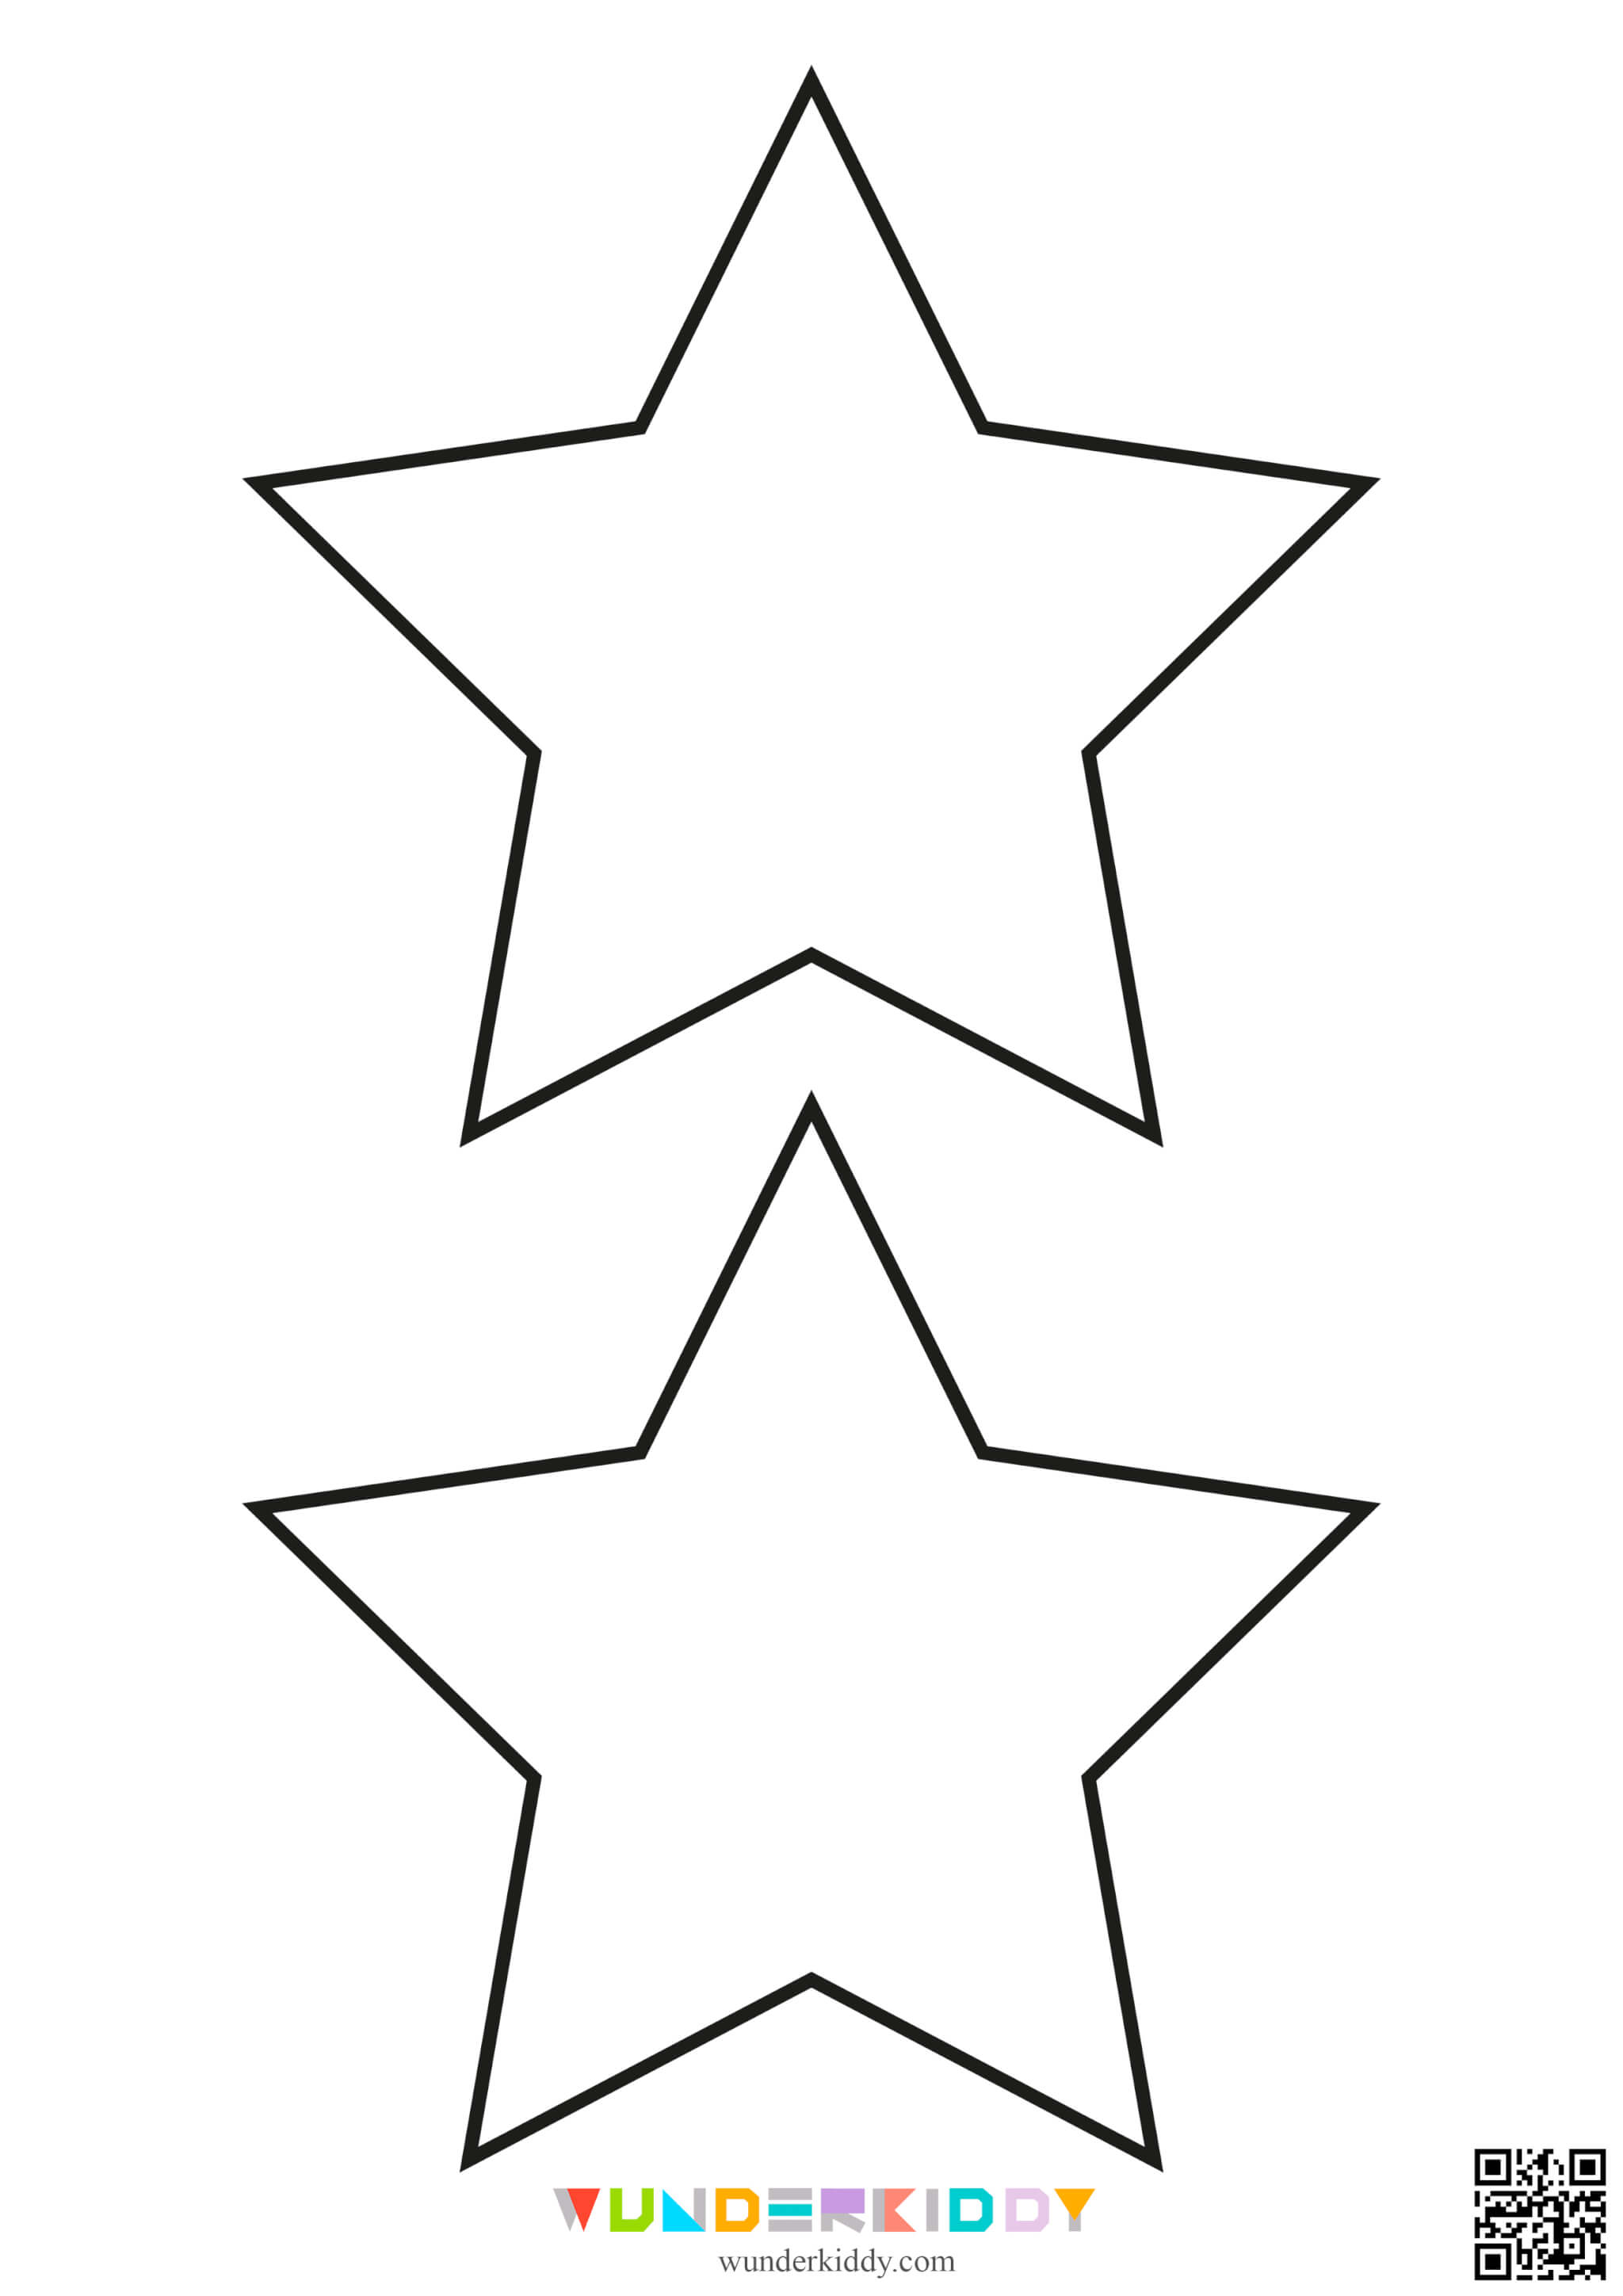 Star Outlines Templates - Image 4